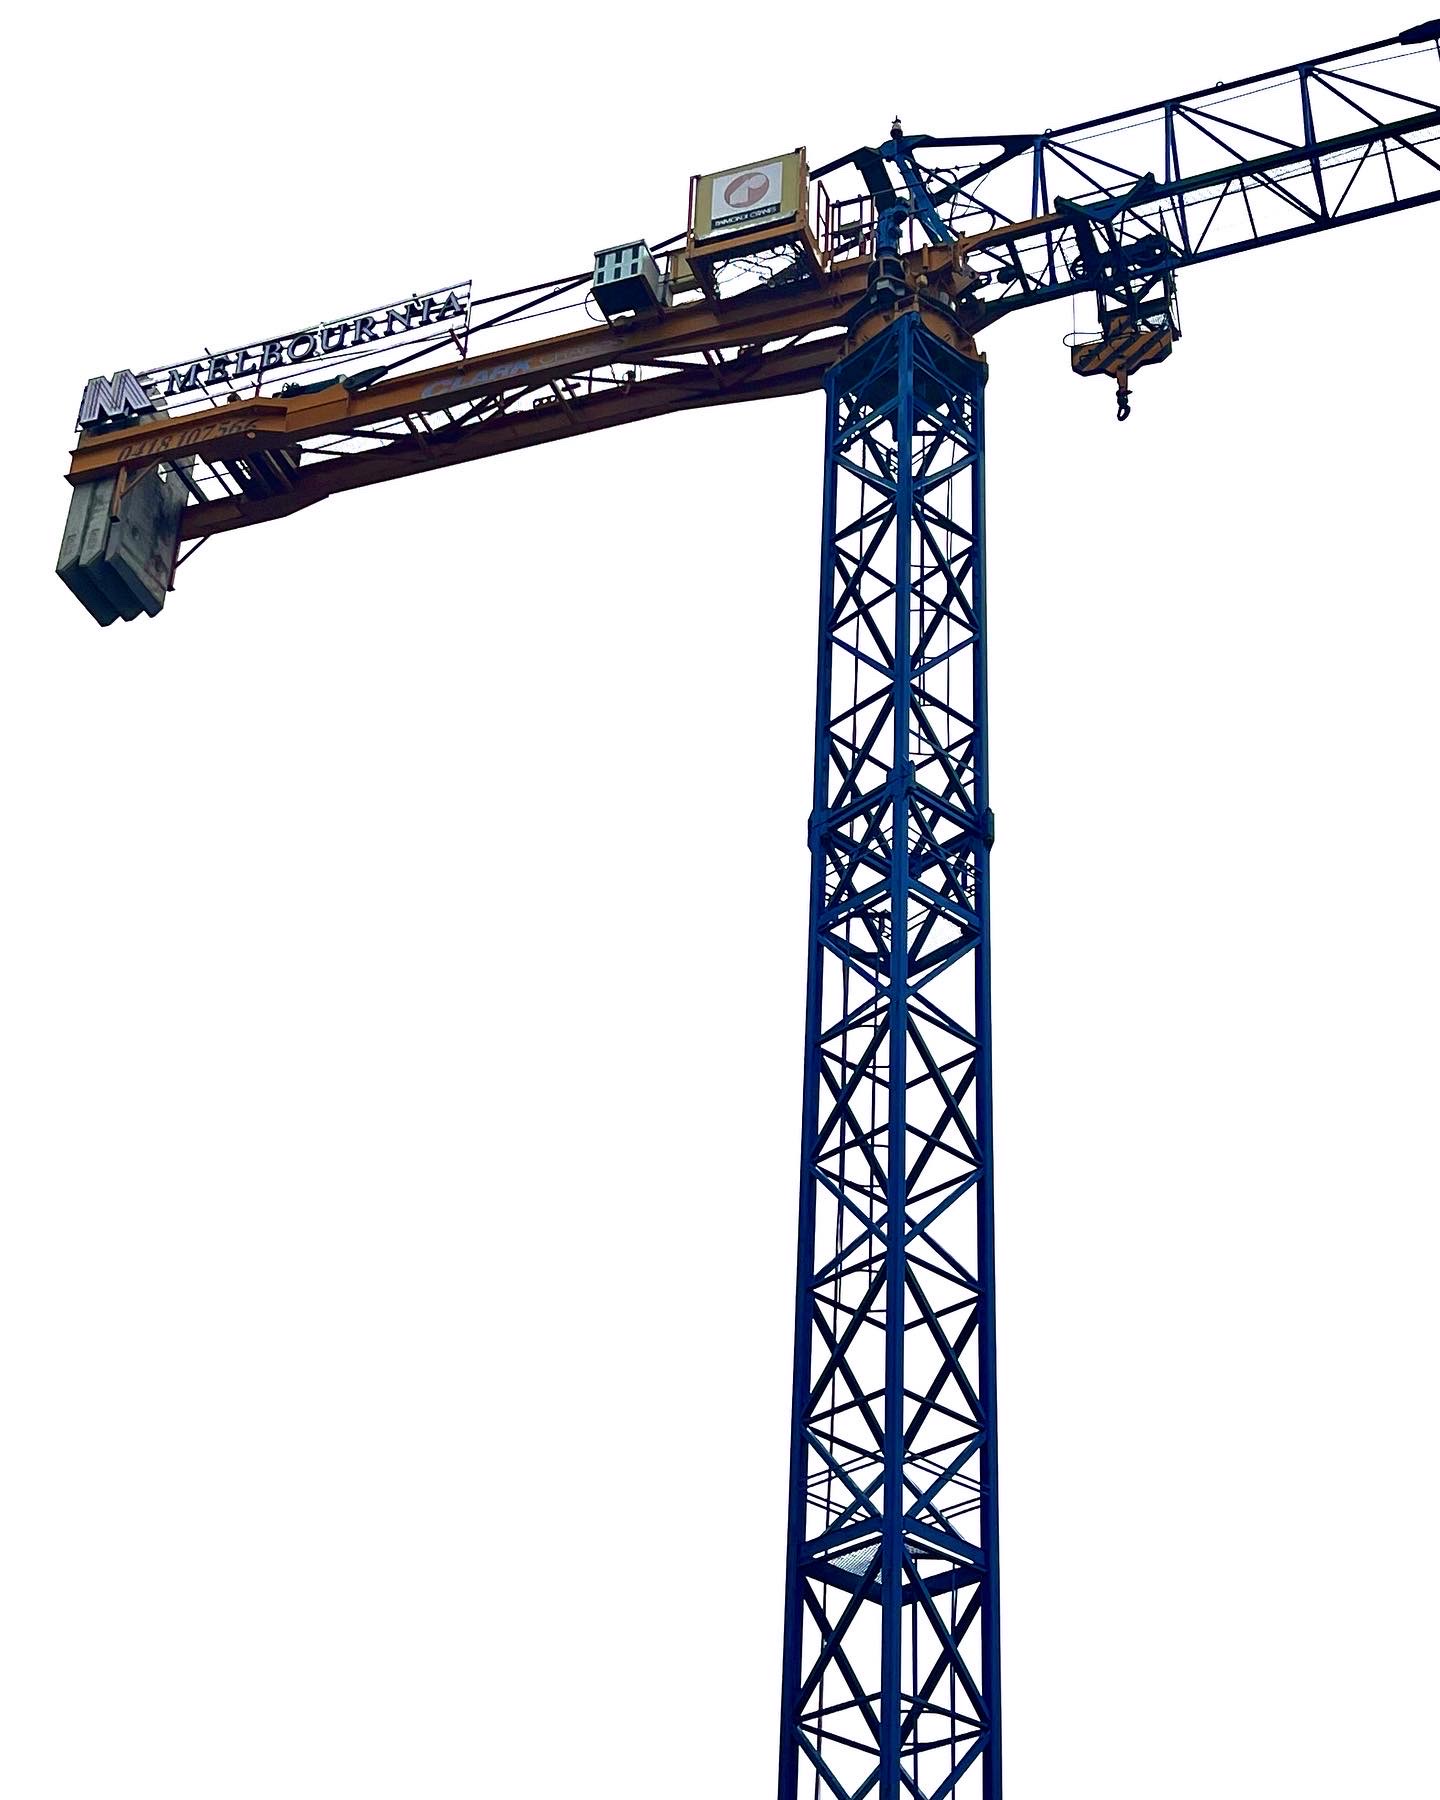 Our Residential Project Couture Armadale Has Hit Another Milestone With Its Tower Crane Erected! 